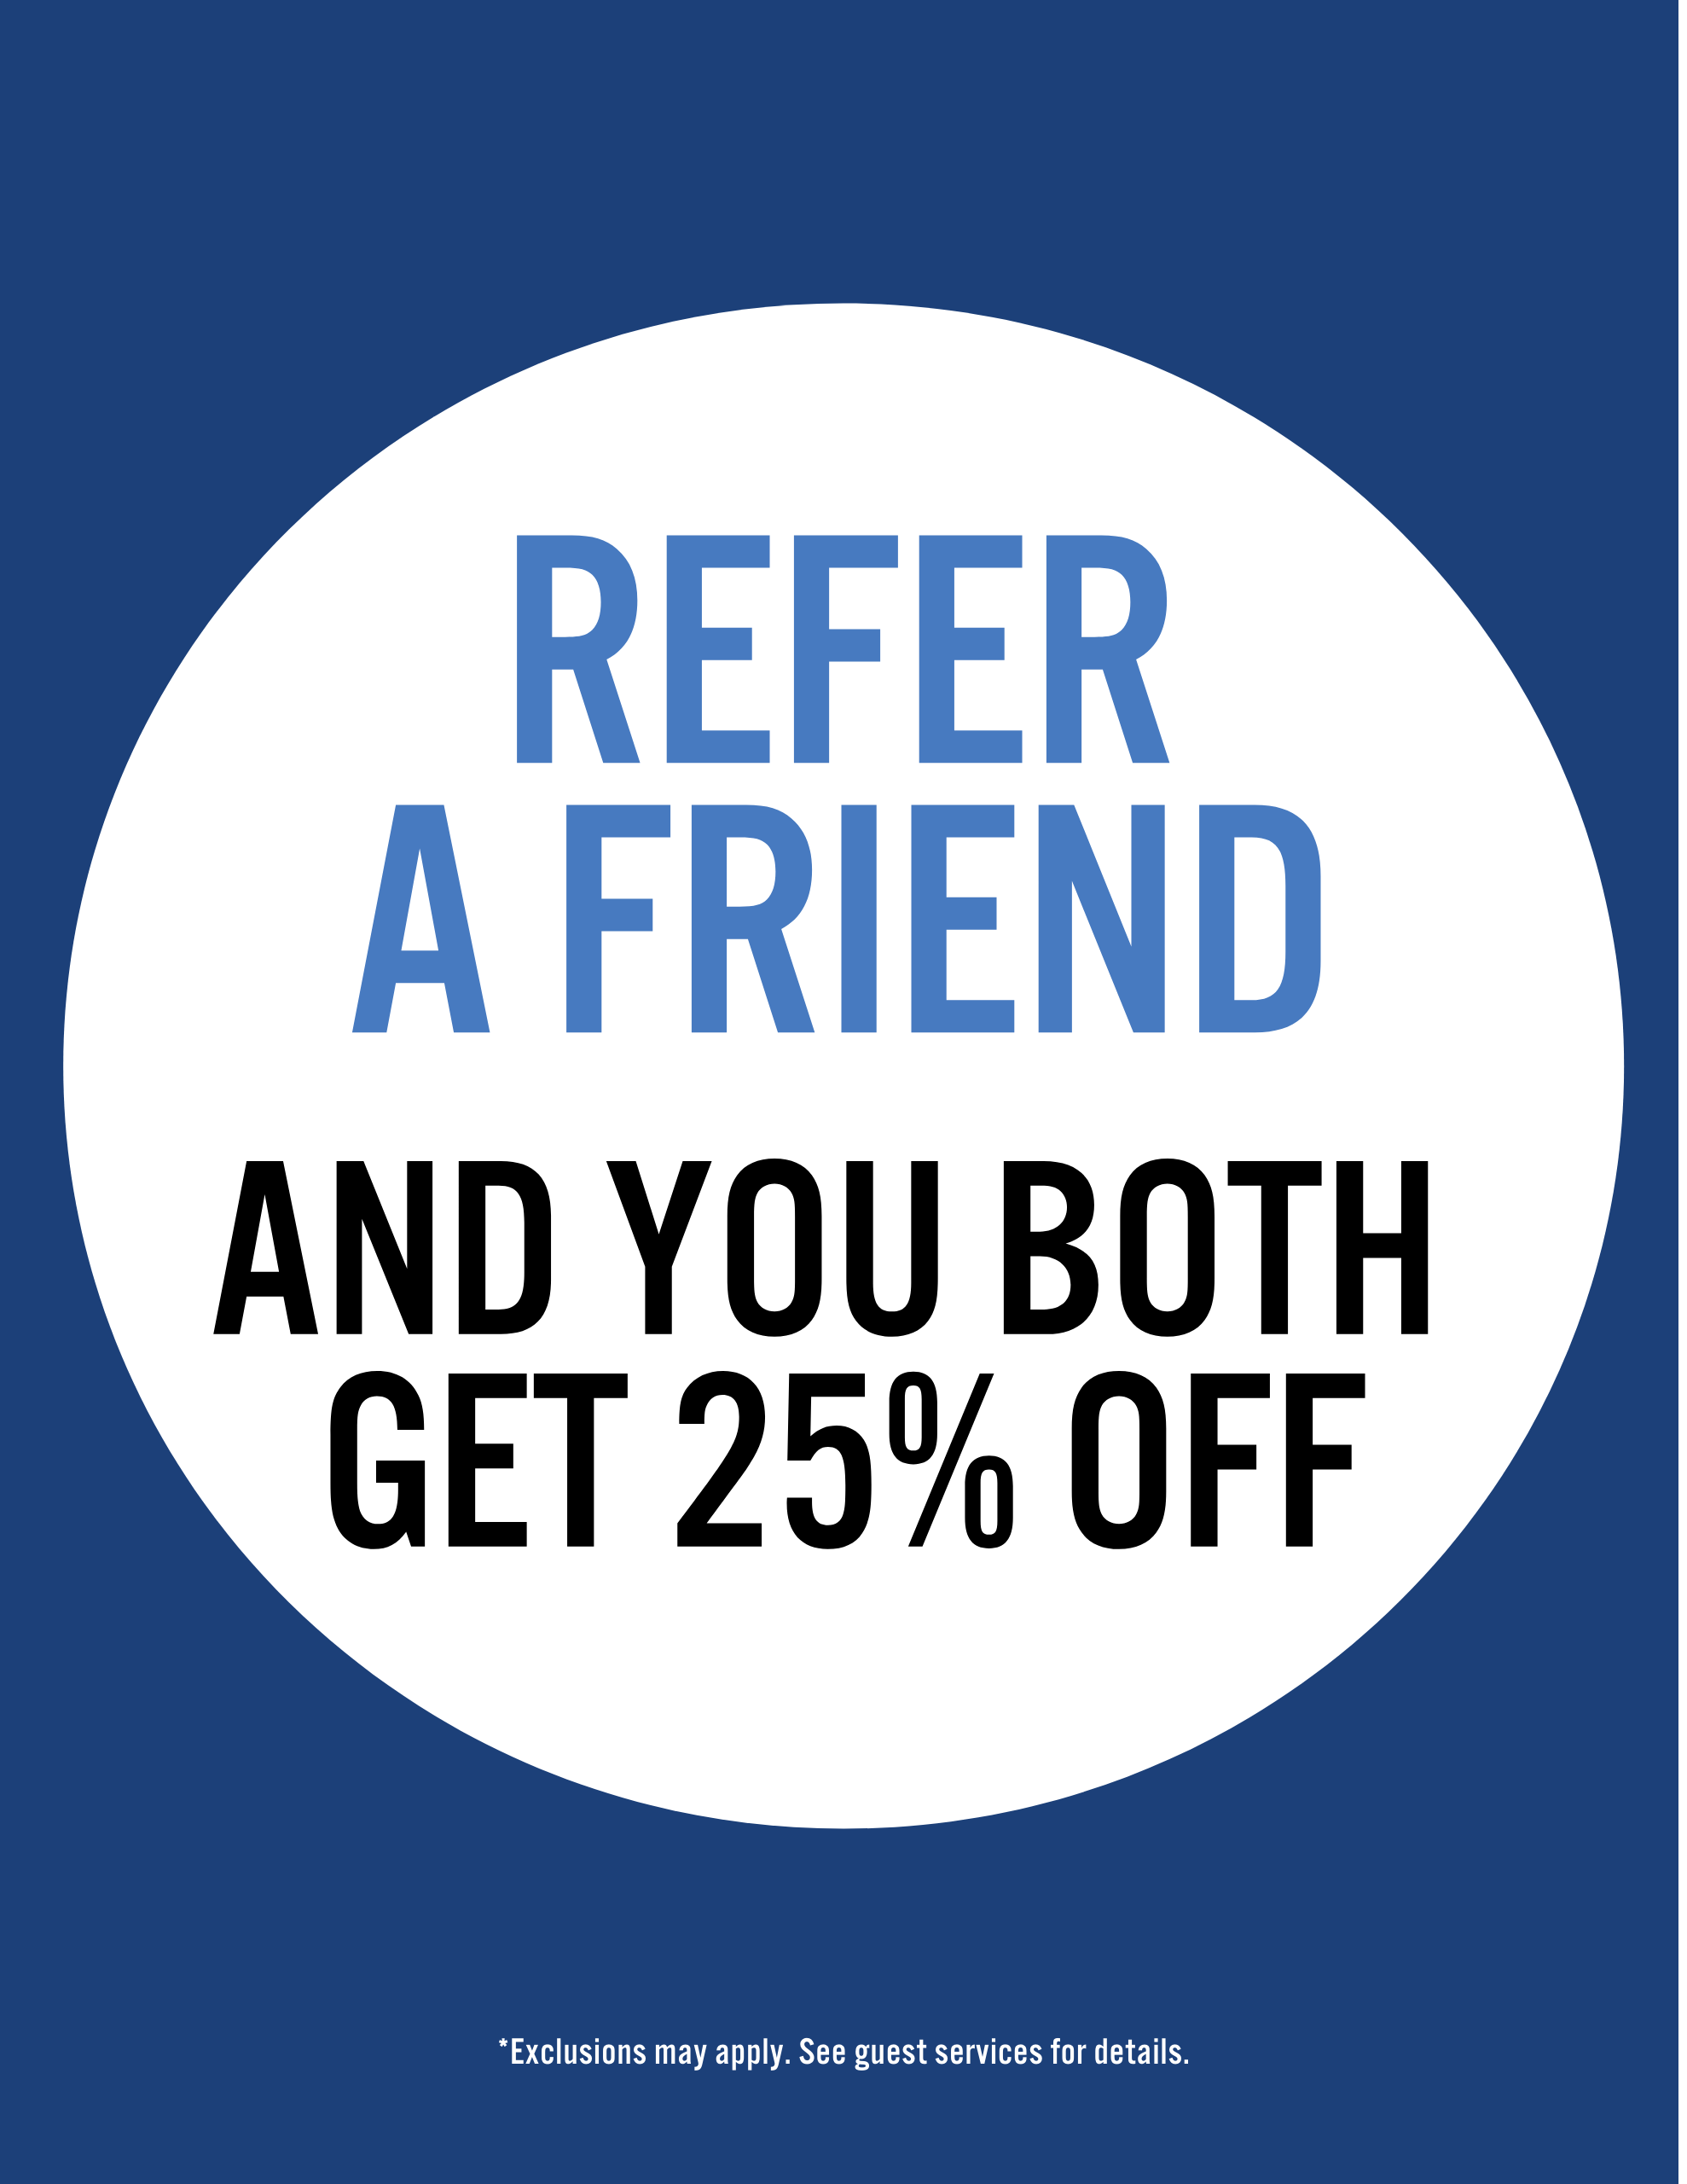 Refer a Friend and You Both Get 25% Off!